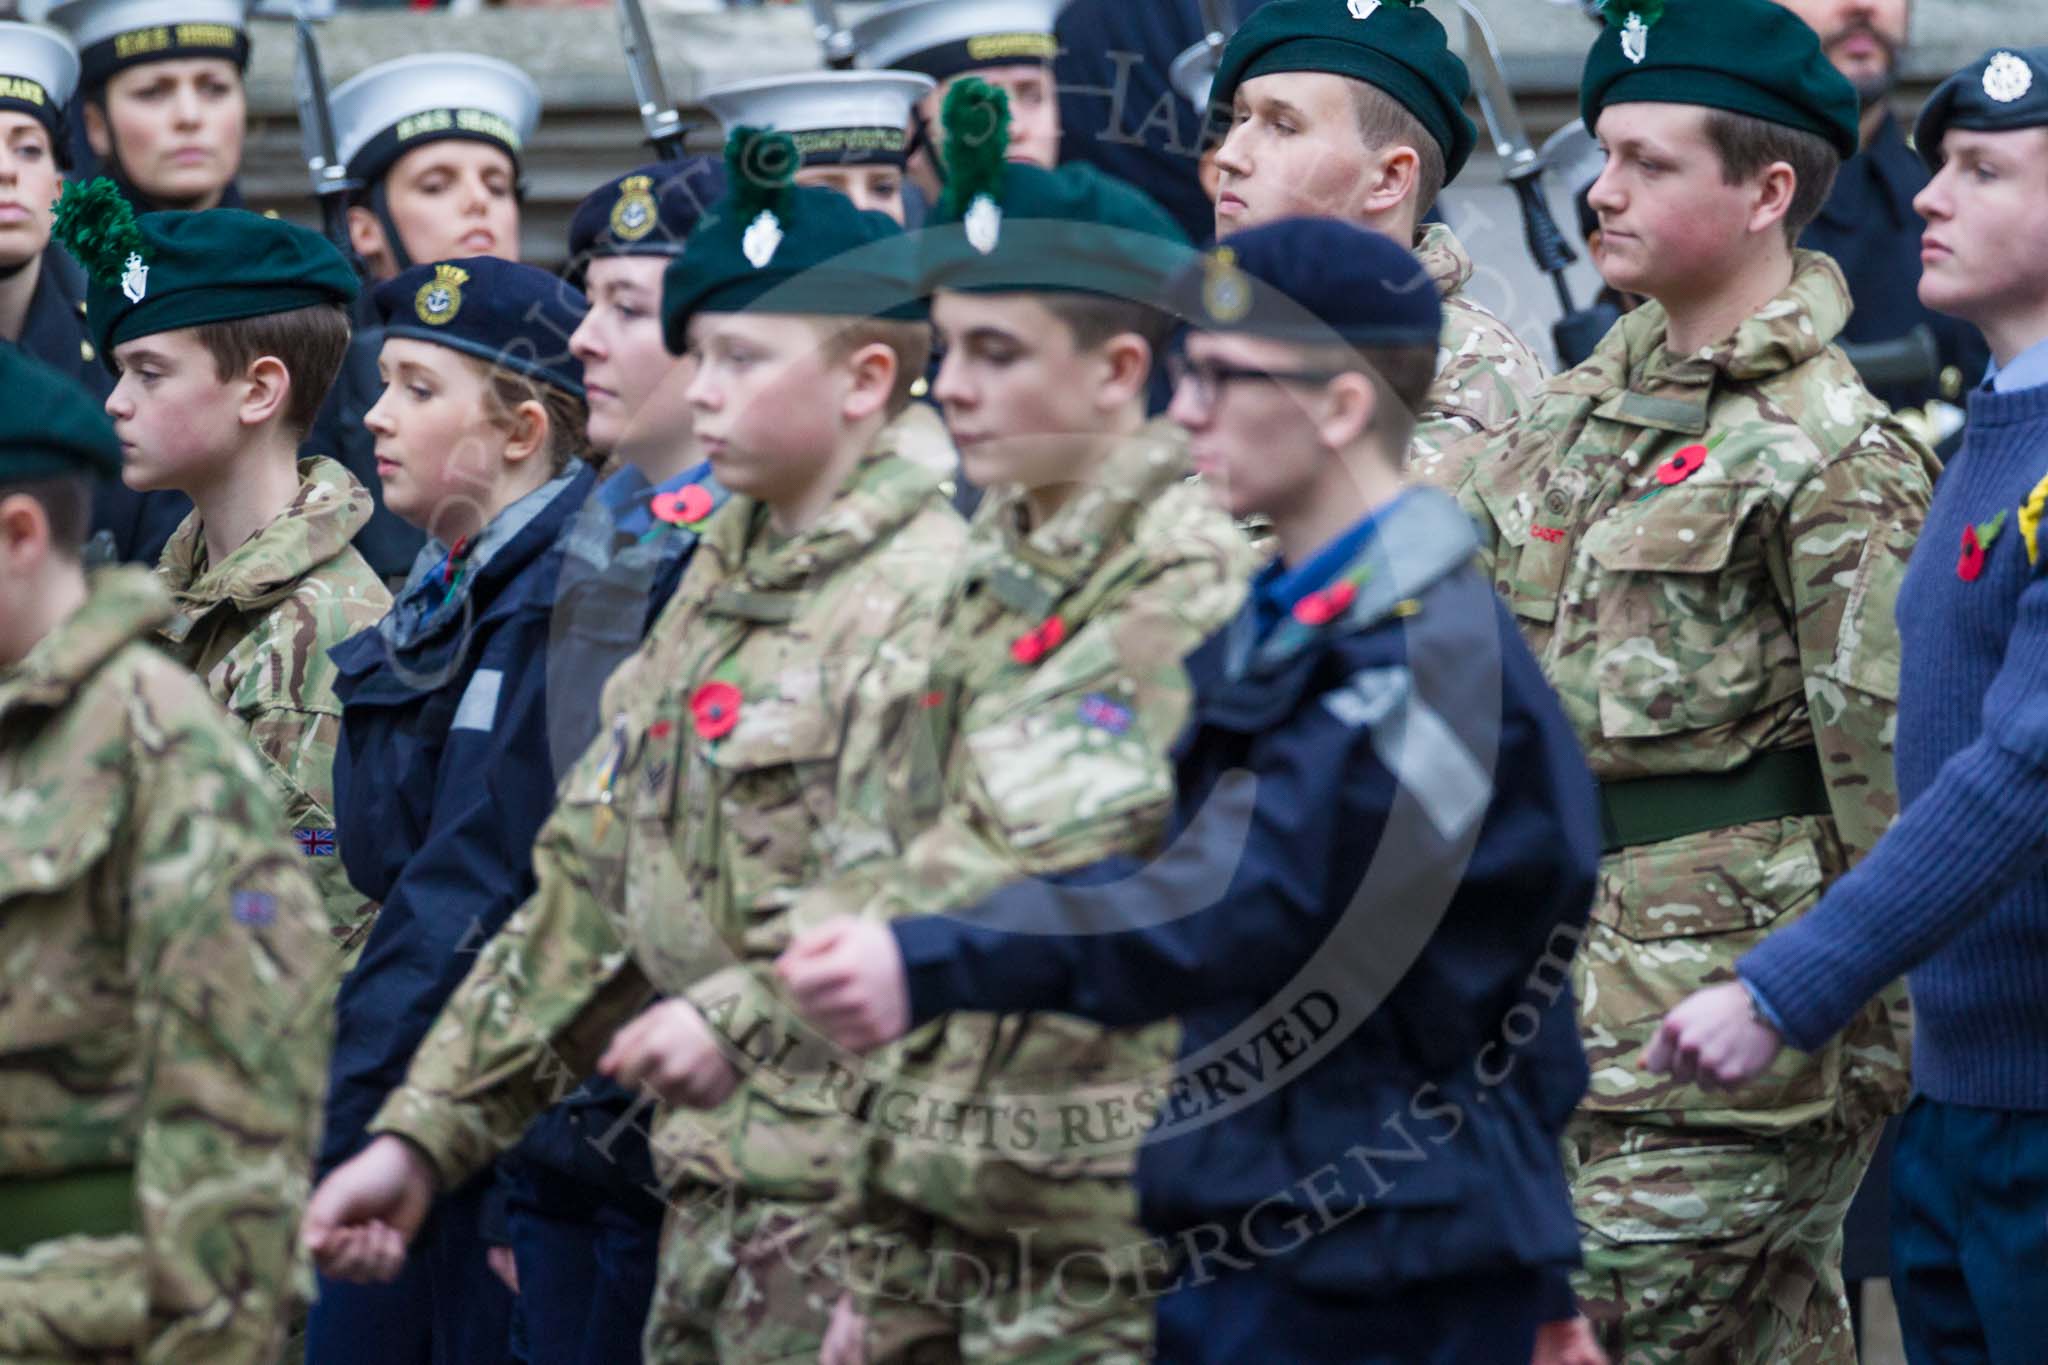 Remembrance Sunday at the Cenotaph 2015: Group M46, Sea Cadet Corps.
Cenotaph, Whitehall, London SW1,
London,
Greater London,
United Kingdom,
on 08 November 2015 at 12:20, image #1695